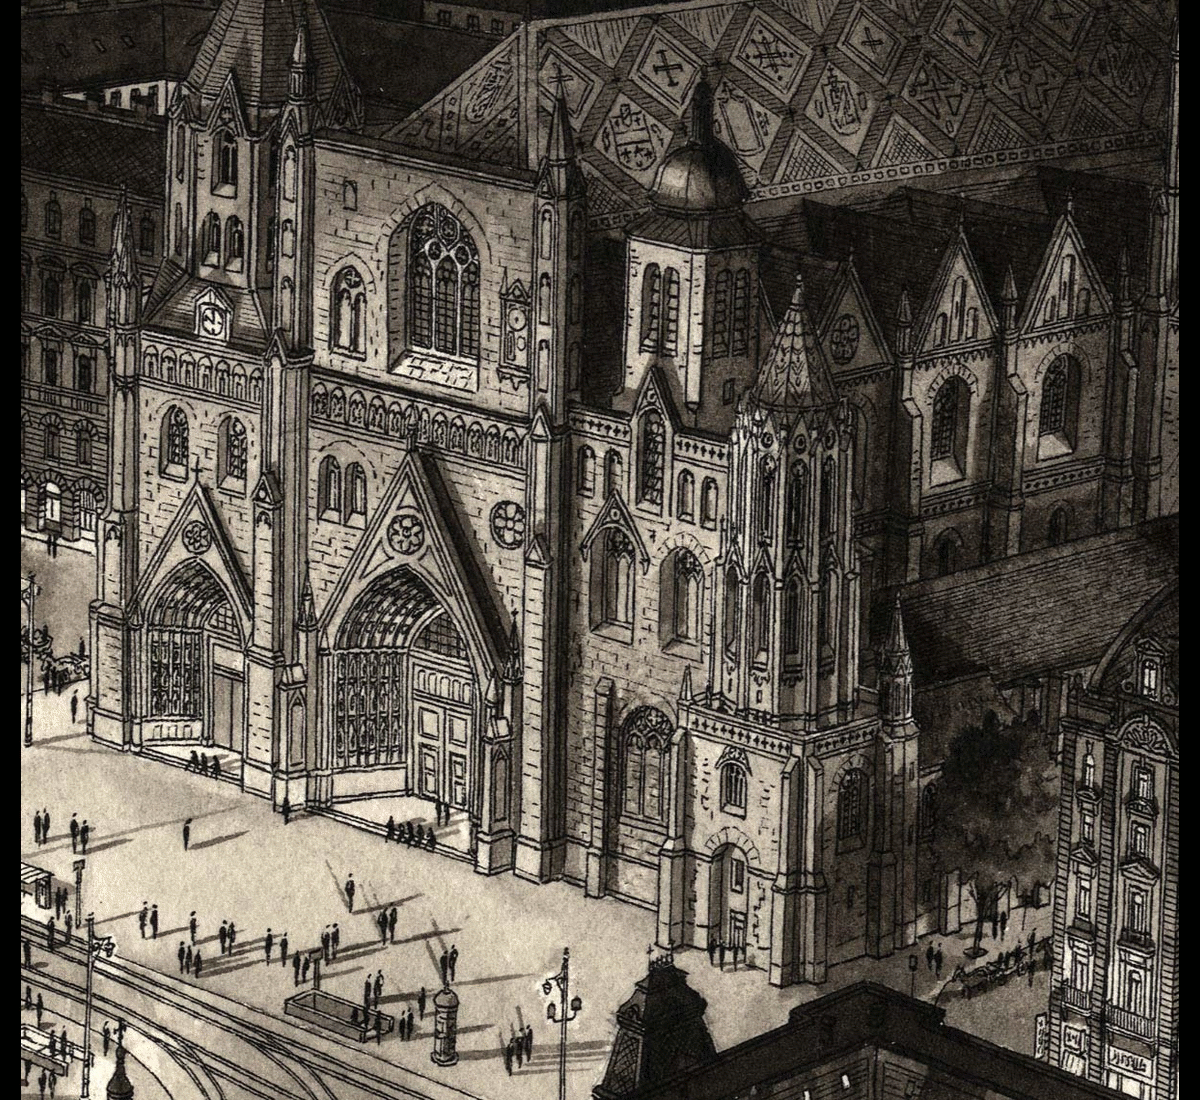 19-Vienna-at-Night-Stefan-Bleekrode-Detailed-Architectural-Drawing-from-the-Imagination-www-designstack-co